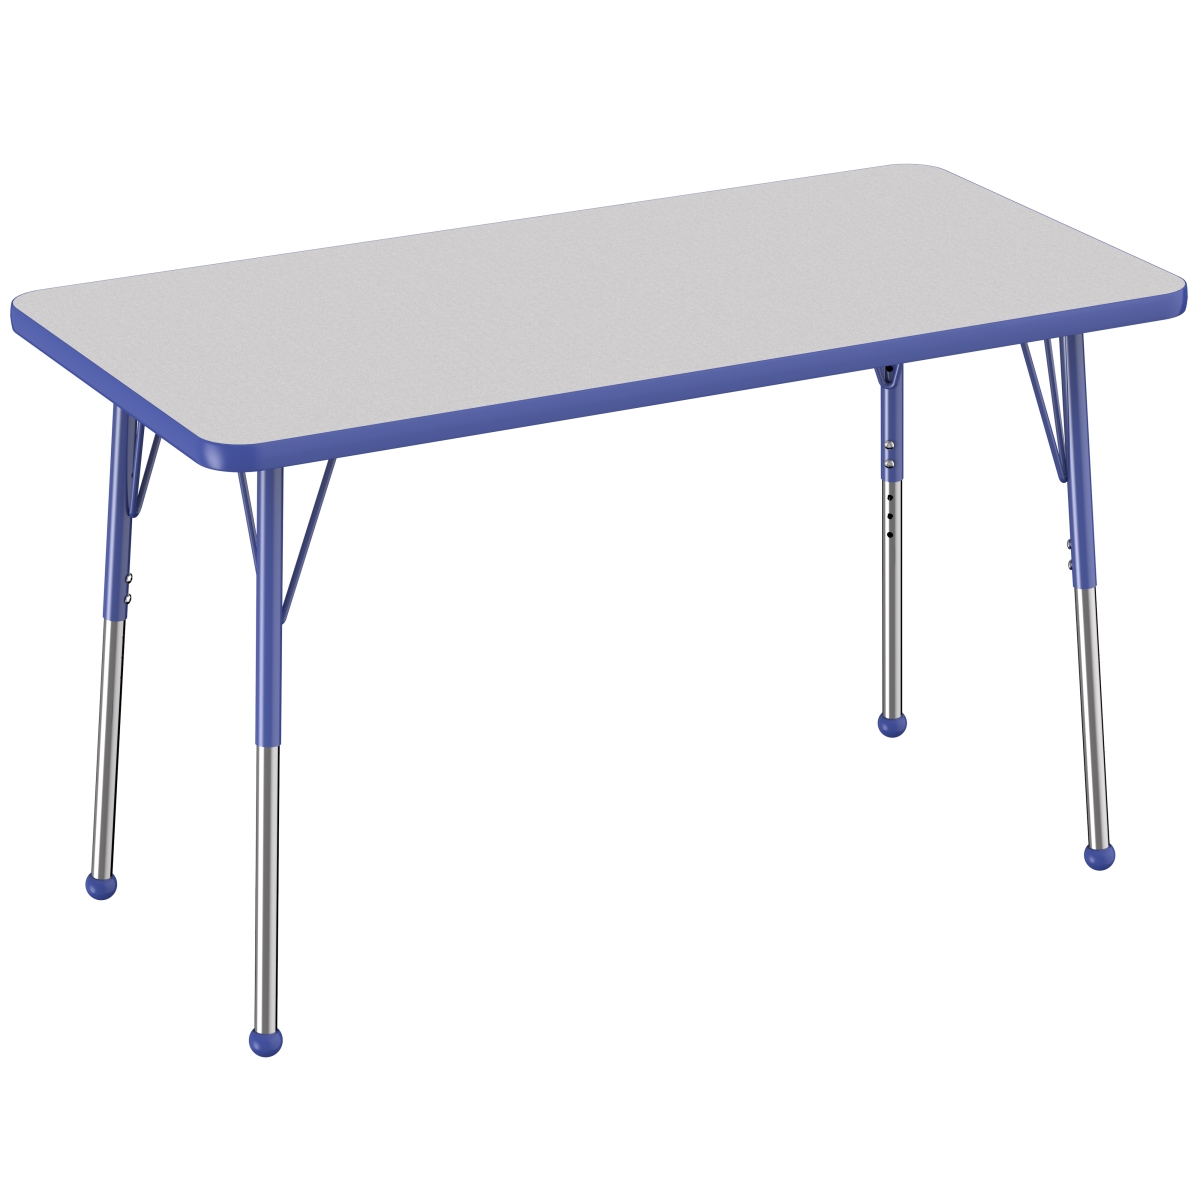 10008-gybl 24 X 48 In. Rectangle T-mold Adjustable Activity Table With Standard Ball - Grey & Blue